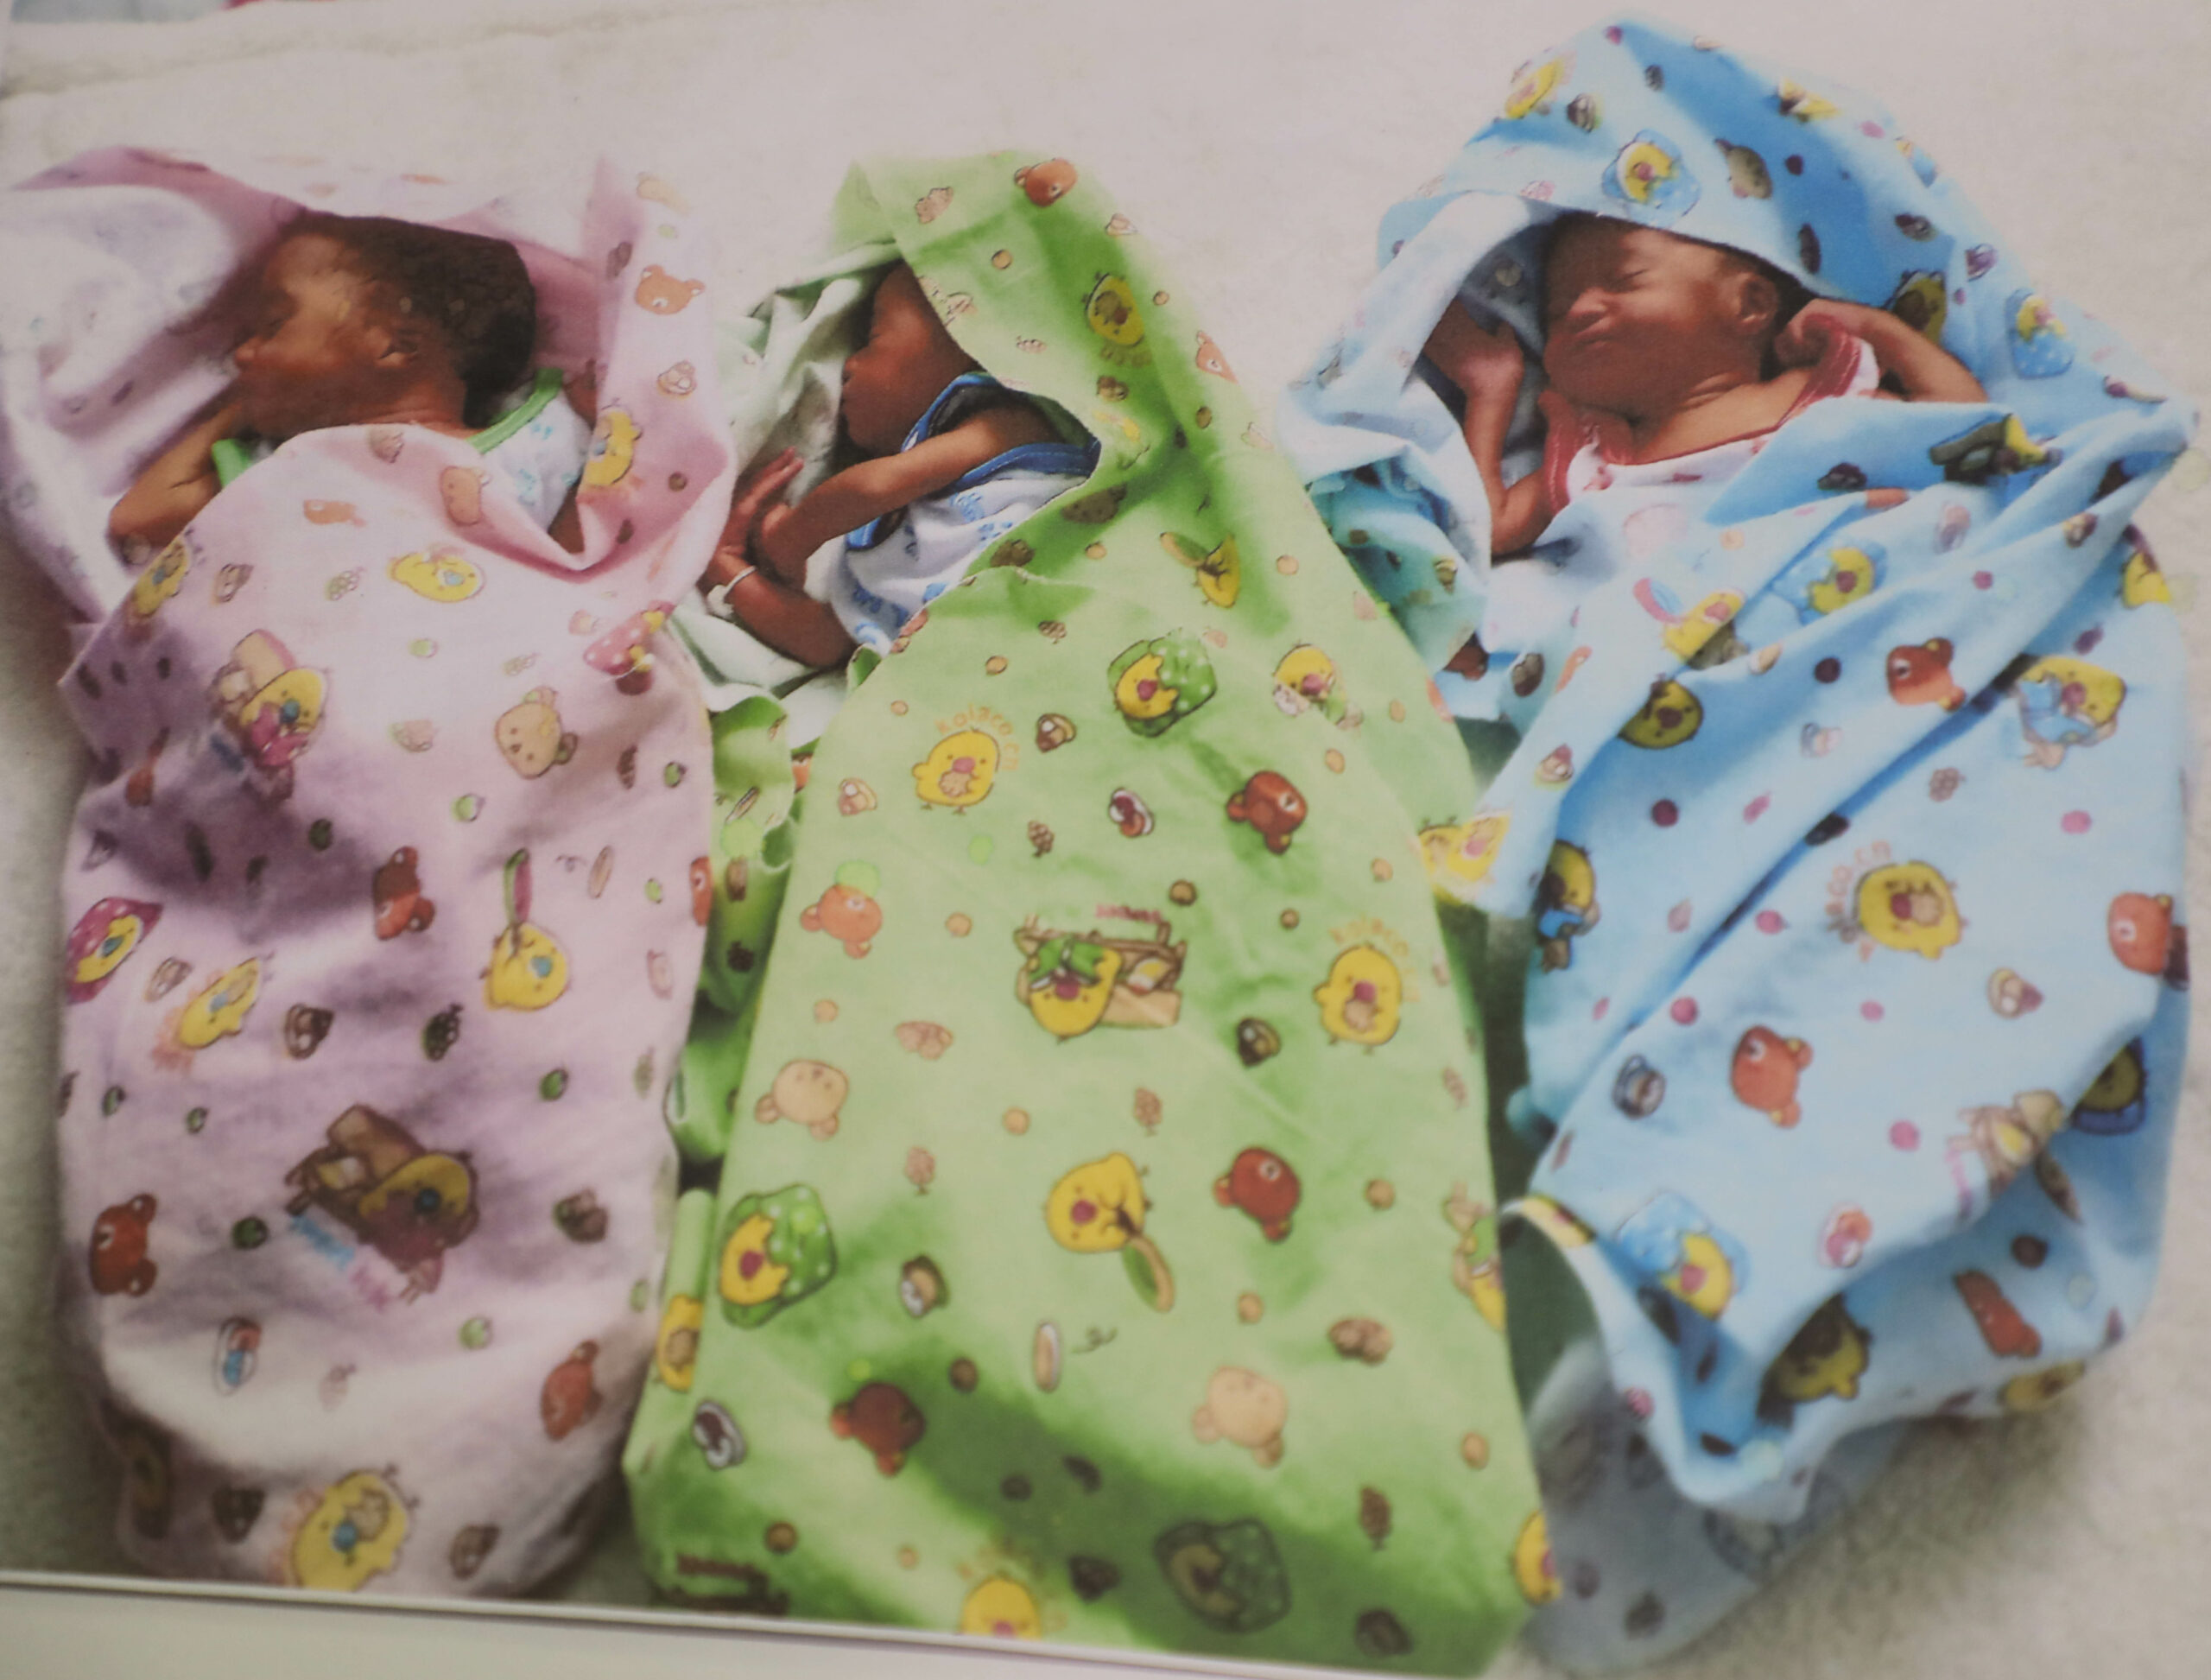 Presidential guard whose wife delivers triplets begs Kiir for help